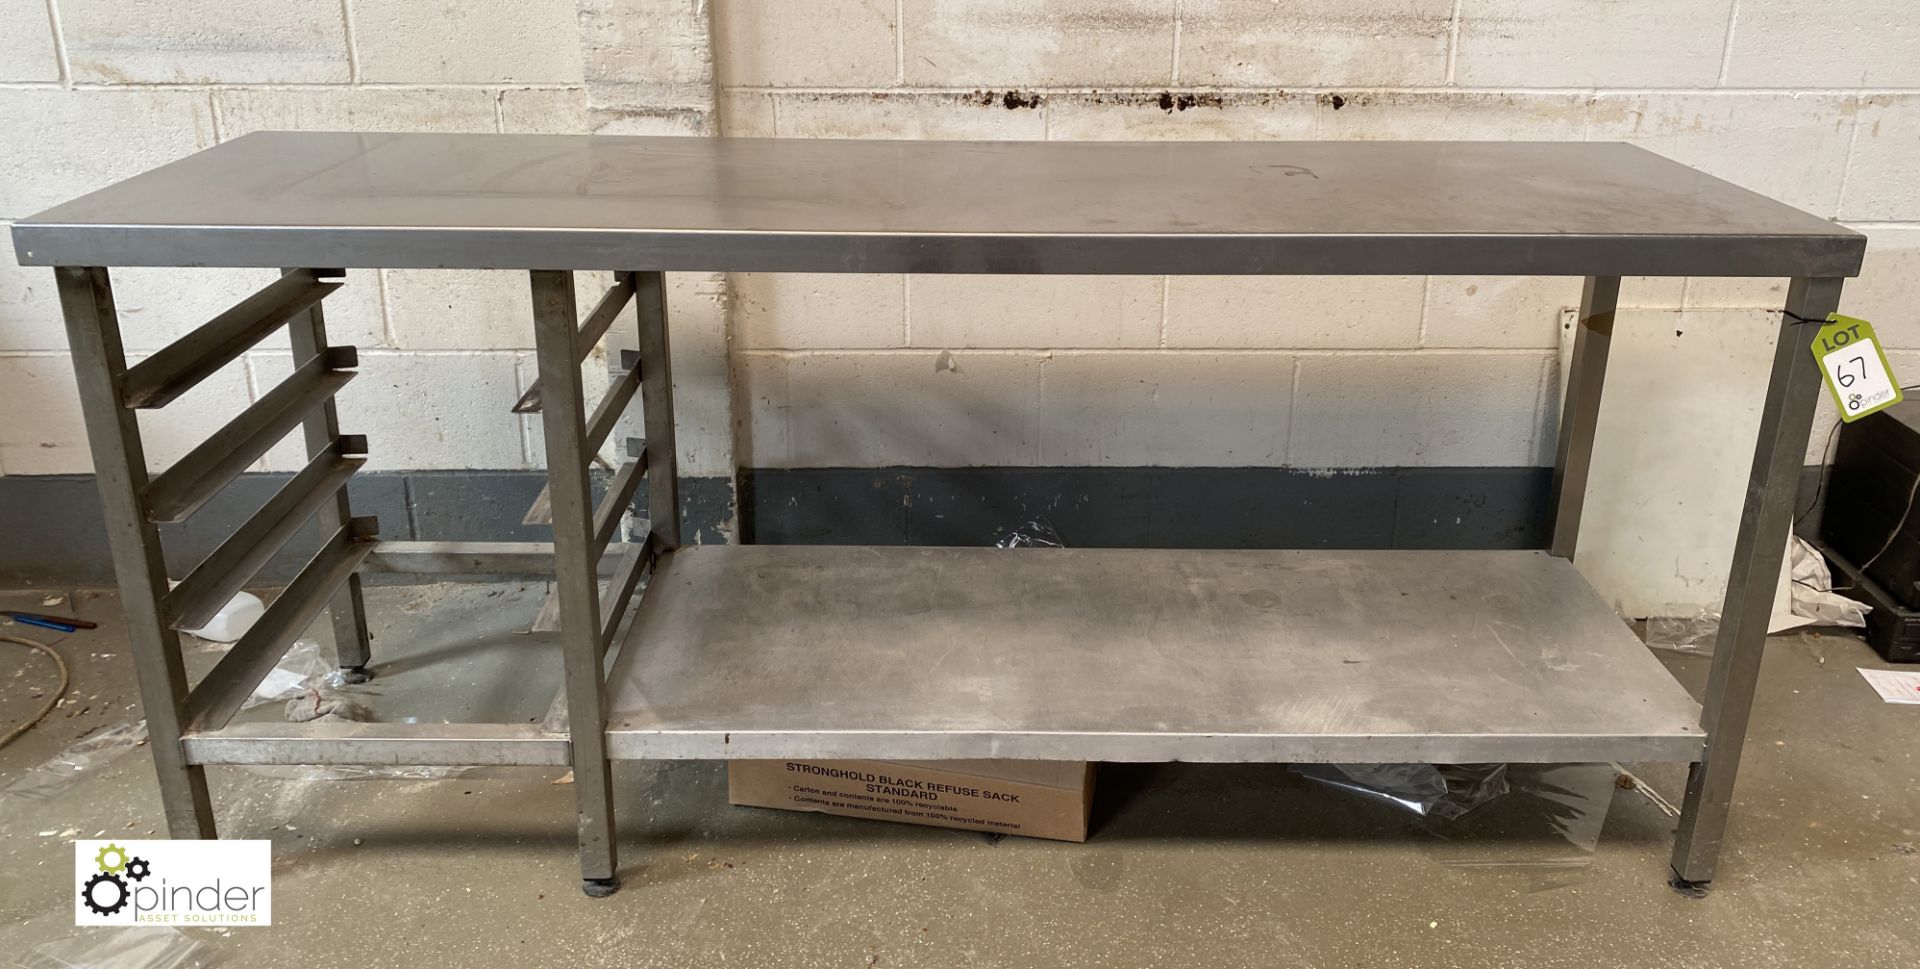 Stainless steel Preparation Table, 1980mm x 600mm x 865mm, with undershelf and tray supports (